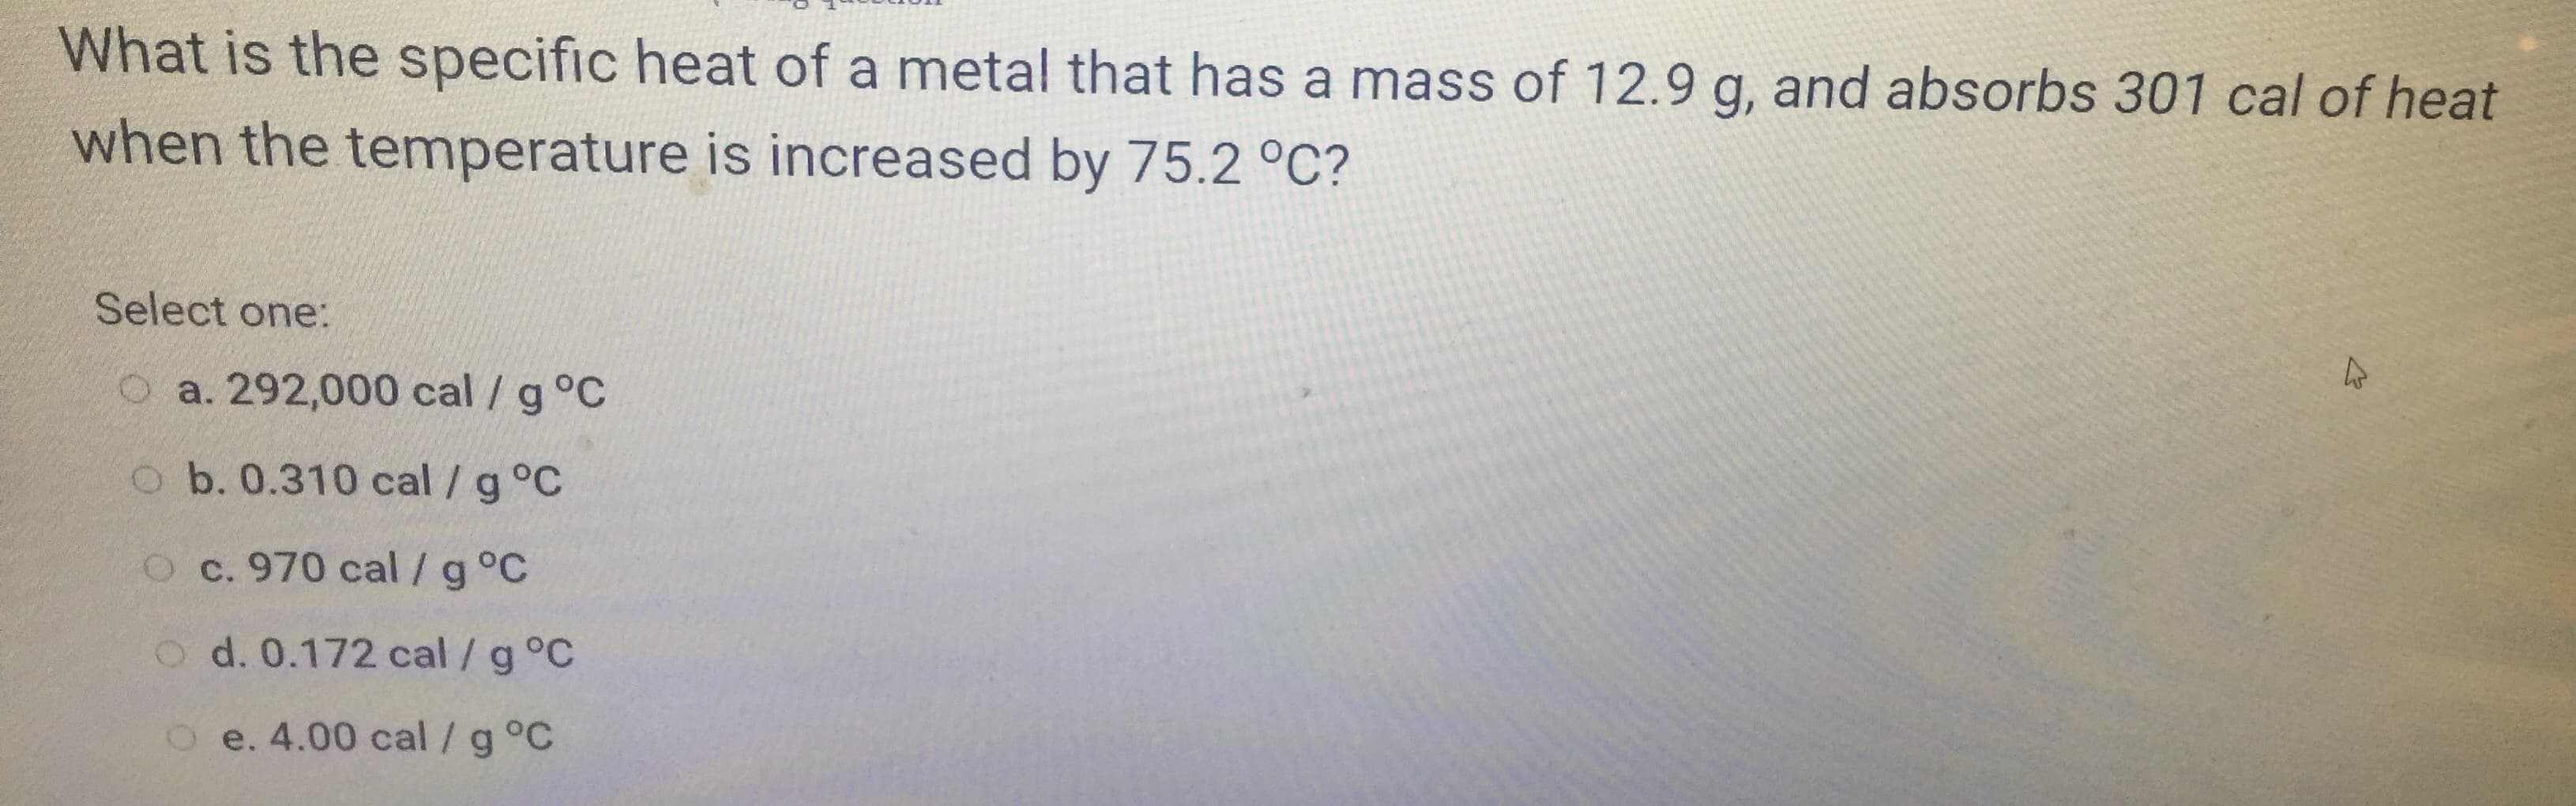 What is the specific heat of a metal that has a mass of 12.9 g, and absorbs 301 cal of heat
when the temperature is increased by 75.2 °C?
Select one:
O a. 292,000 cal /g°C
o b. 0.310 cal / g °C
O c. 970 cal /g°C
o d. 0.172 cal /g°C
O e. 4.00 cal /g °C
